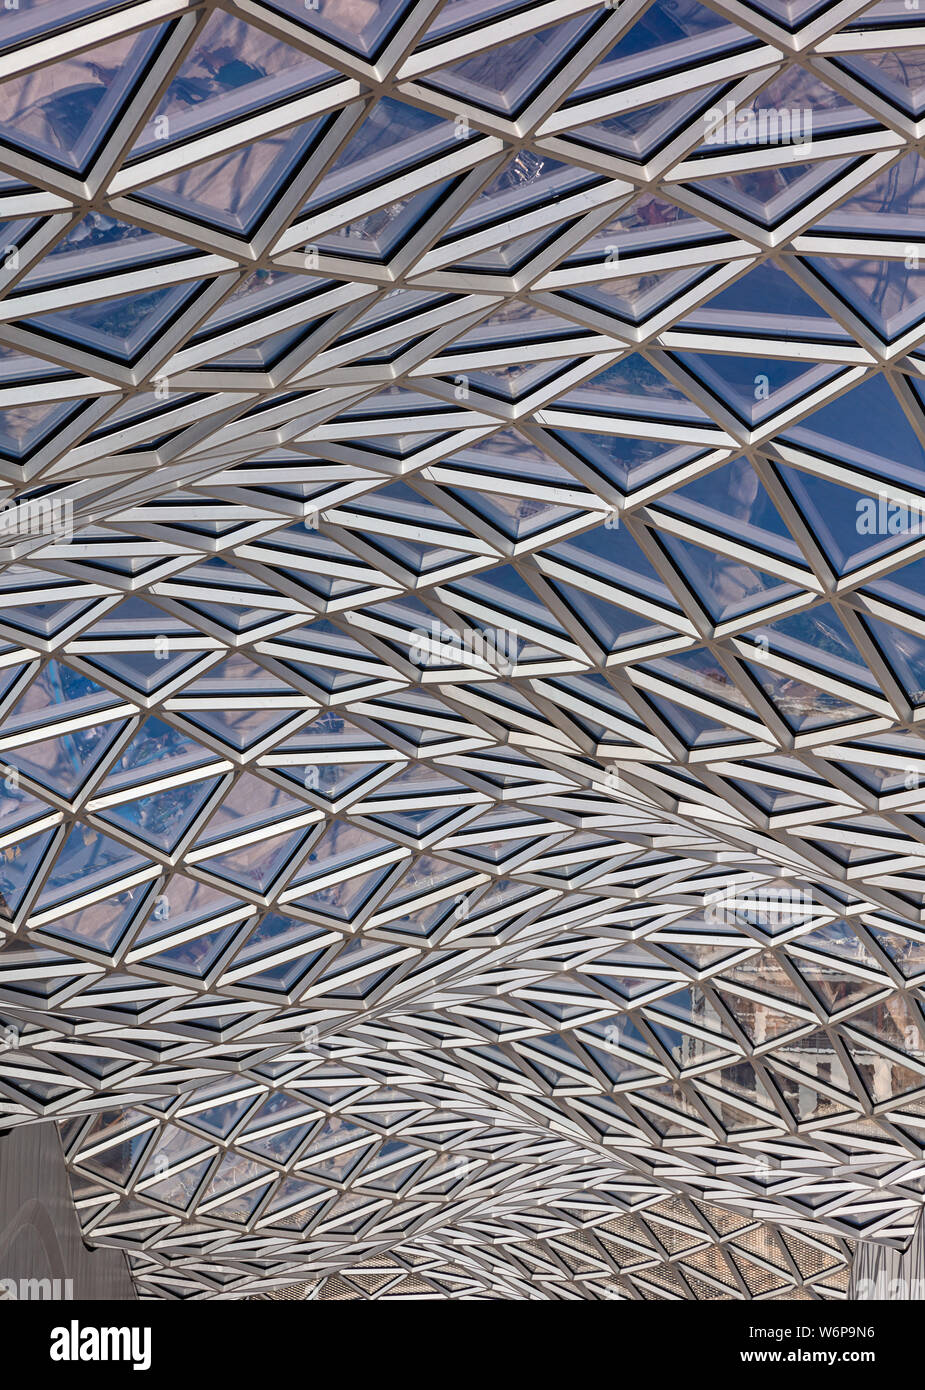 Wavy roof at Westfield Shopping Centre in West London Stock Photo